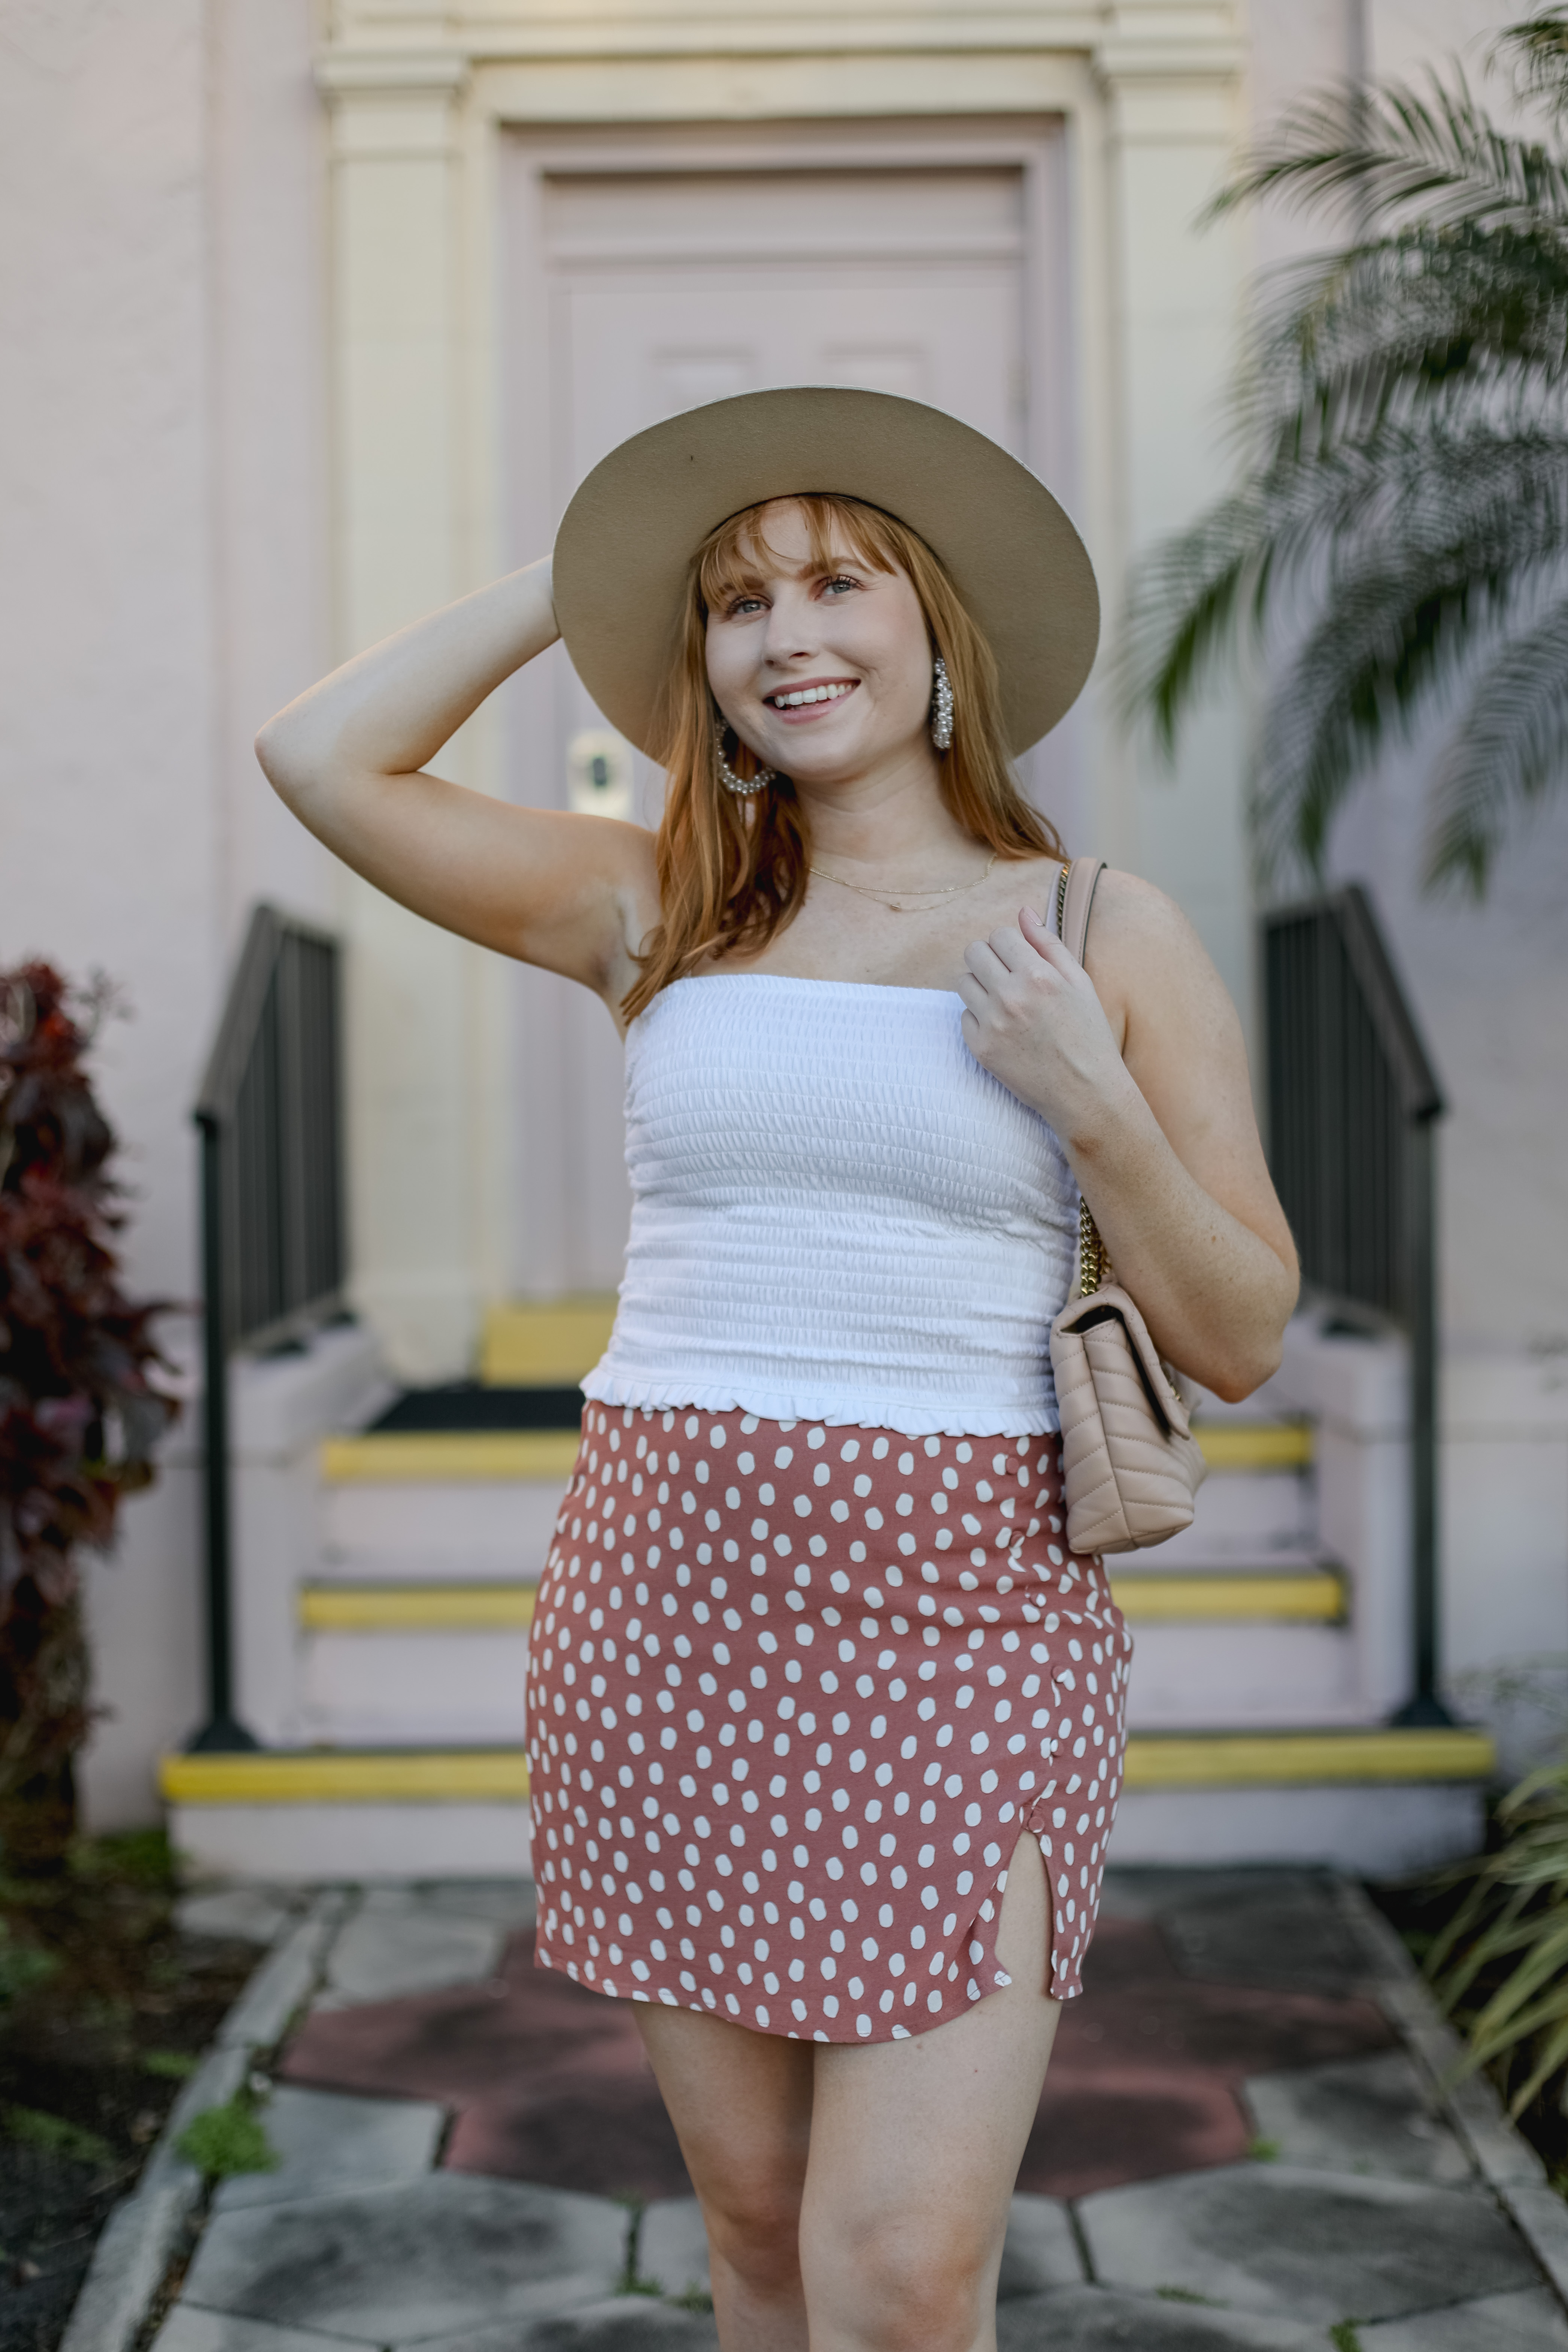 10 Vacation Outfit Ideas 2021 - Affordable by Amanda